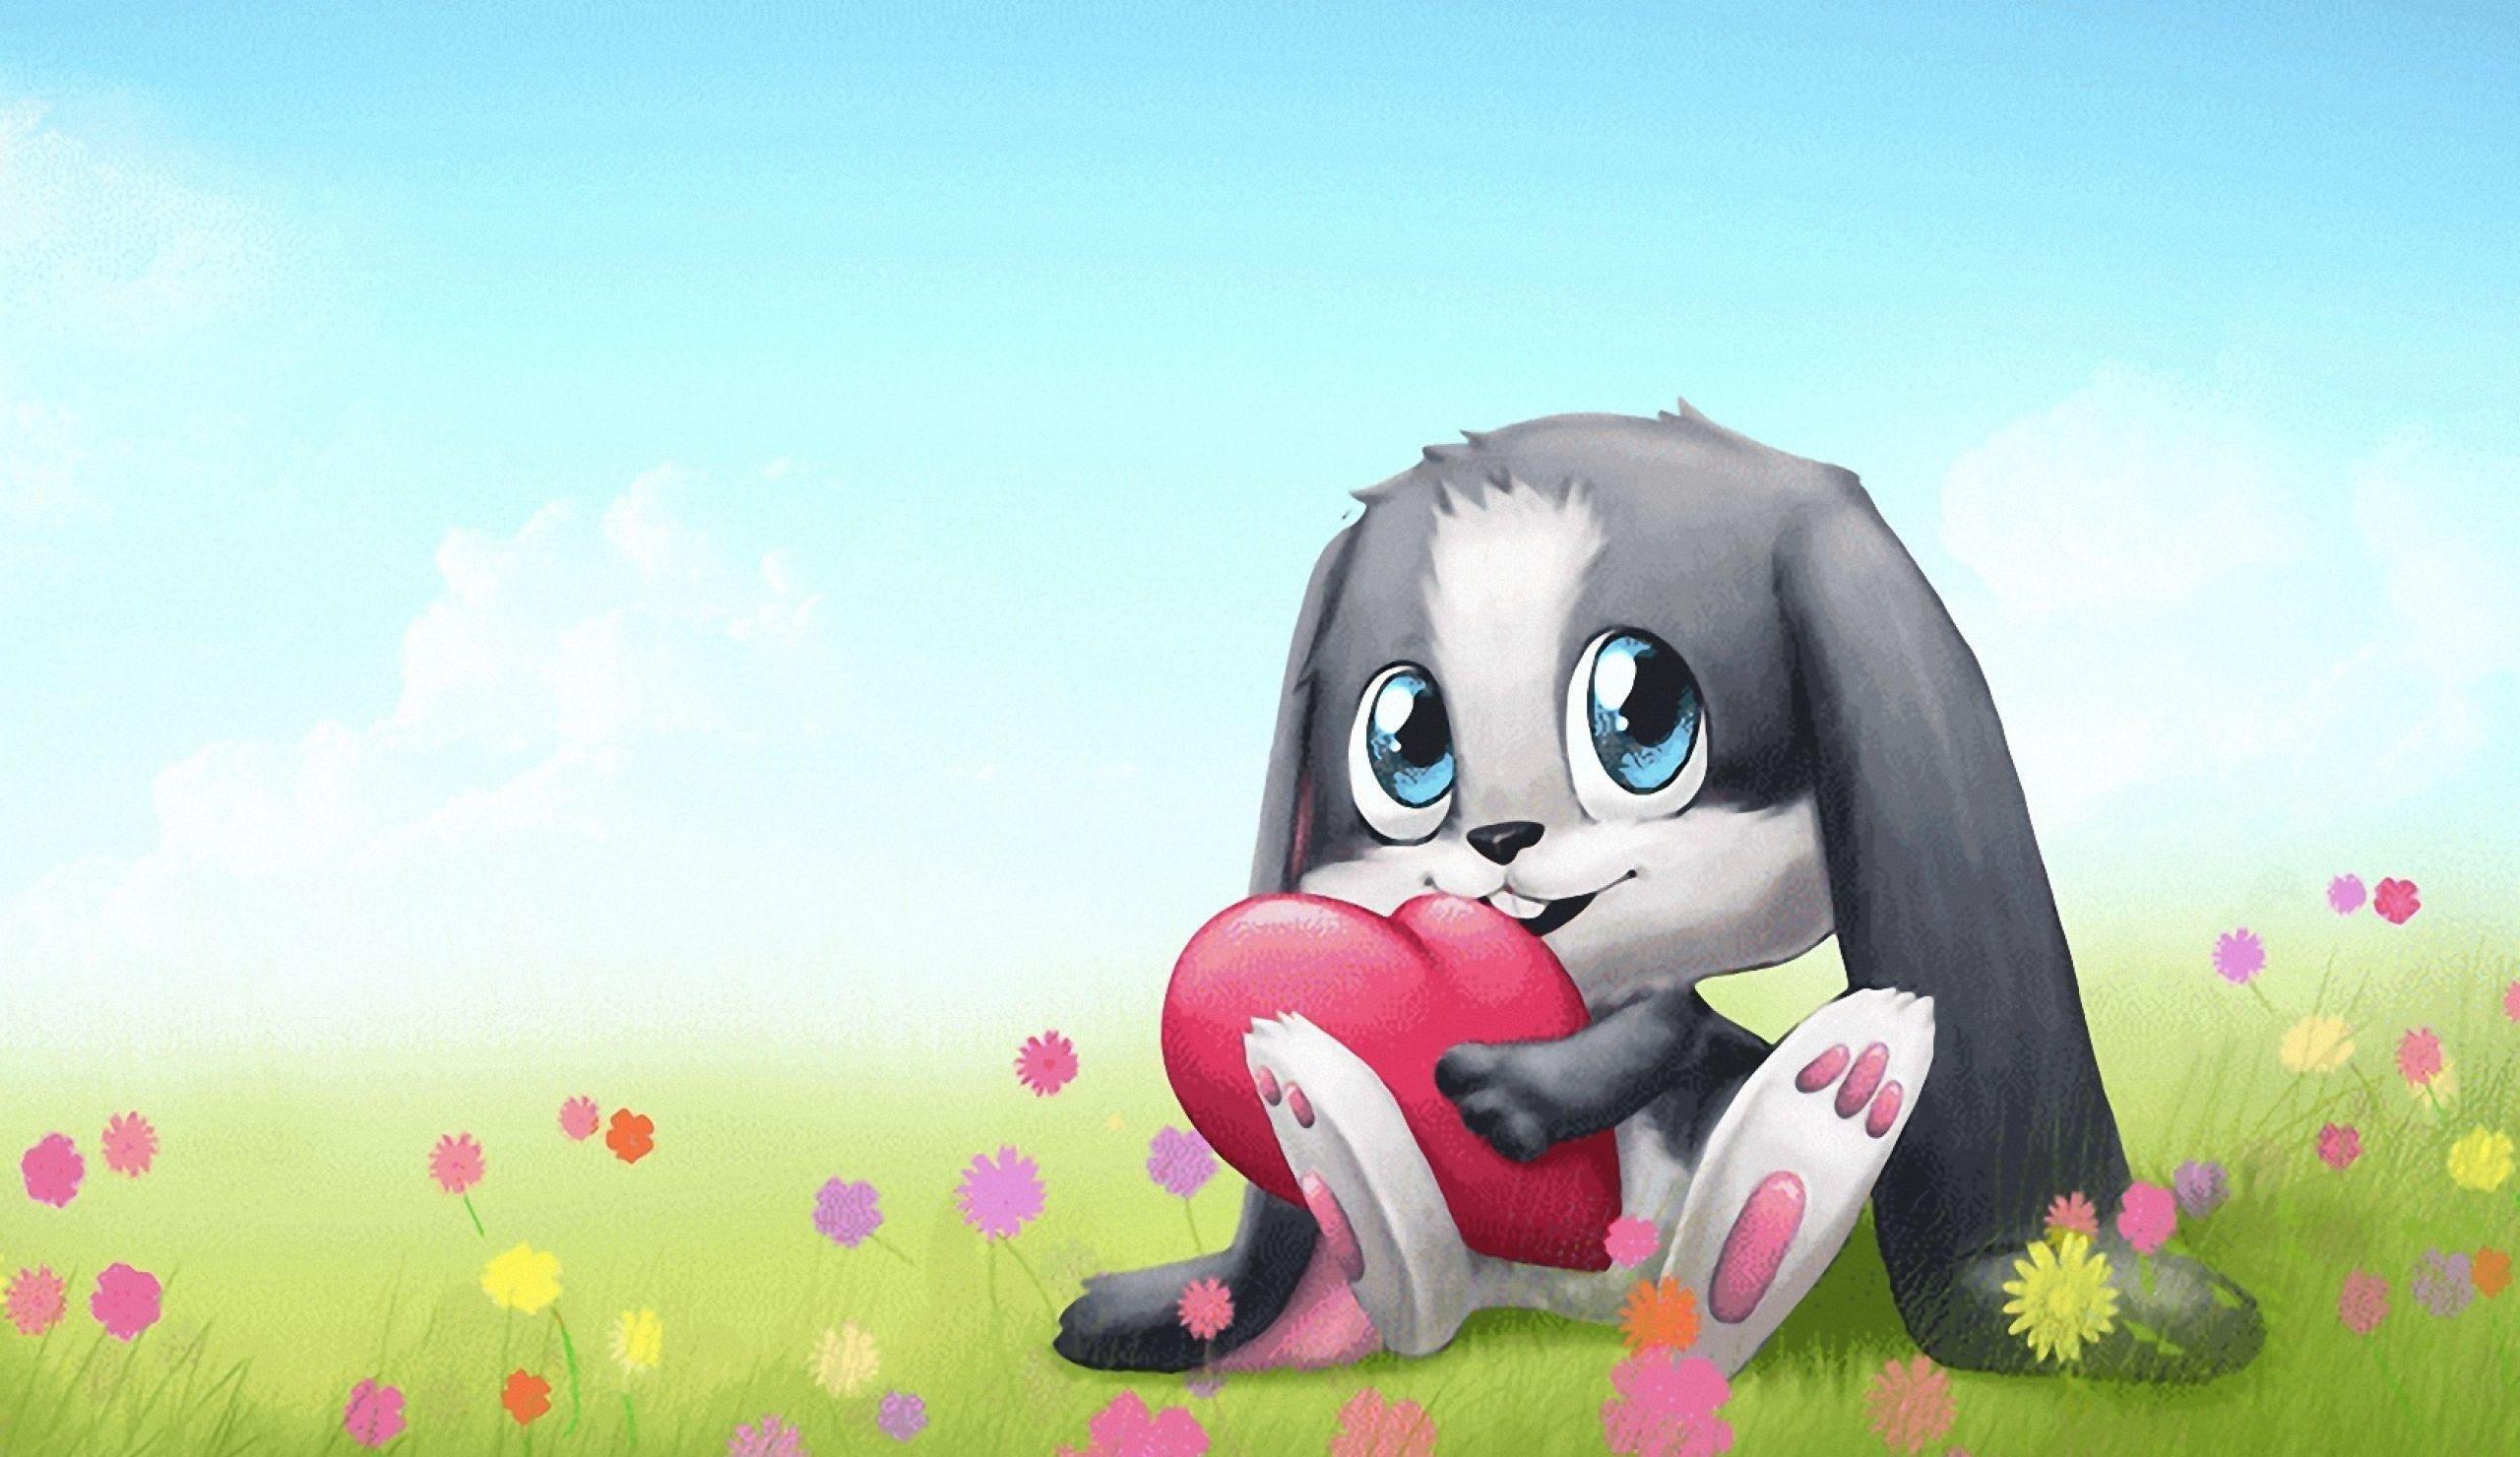 Get cute animals anime wallpaper For your desktop and phone